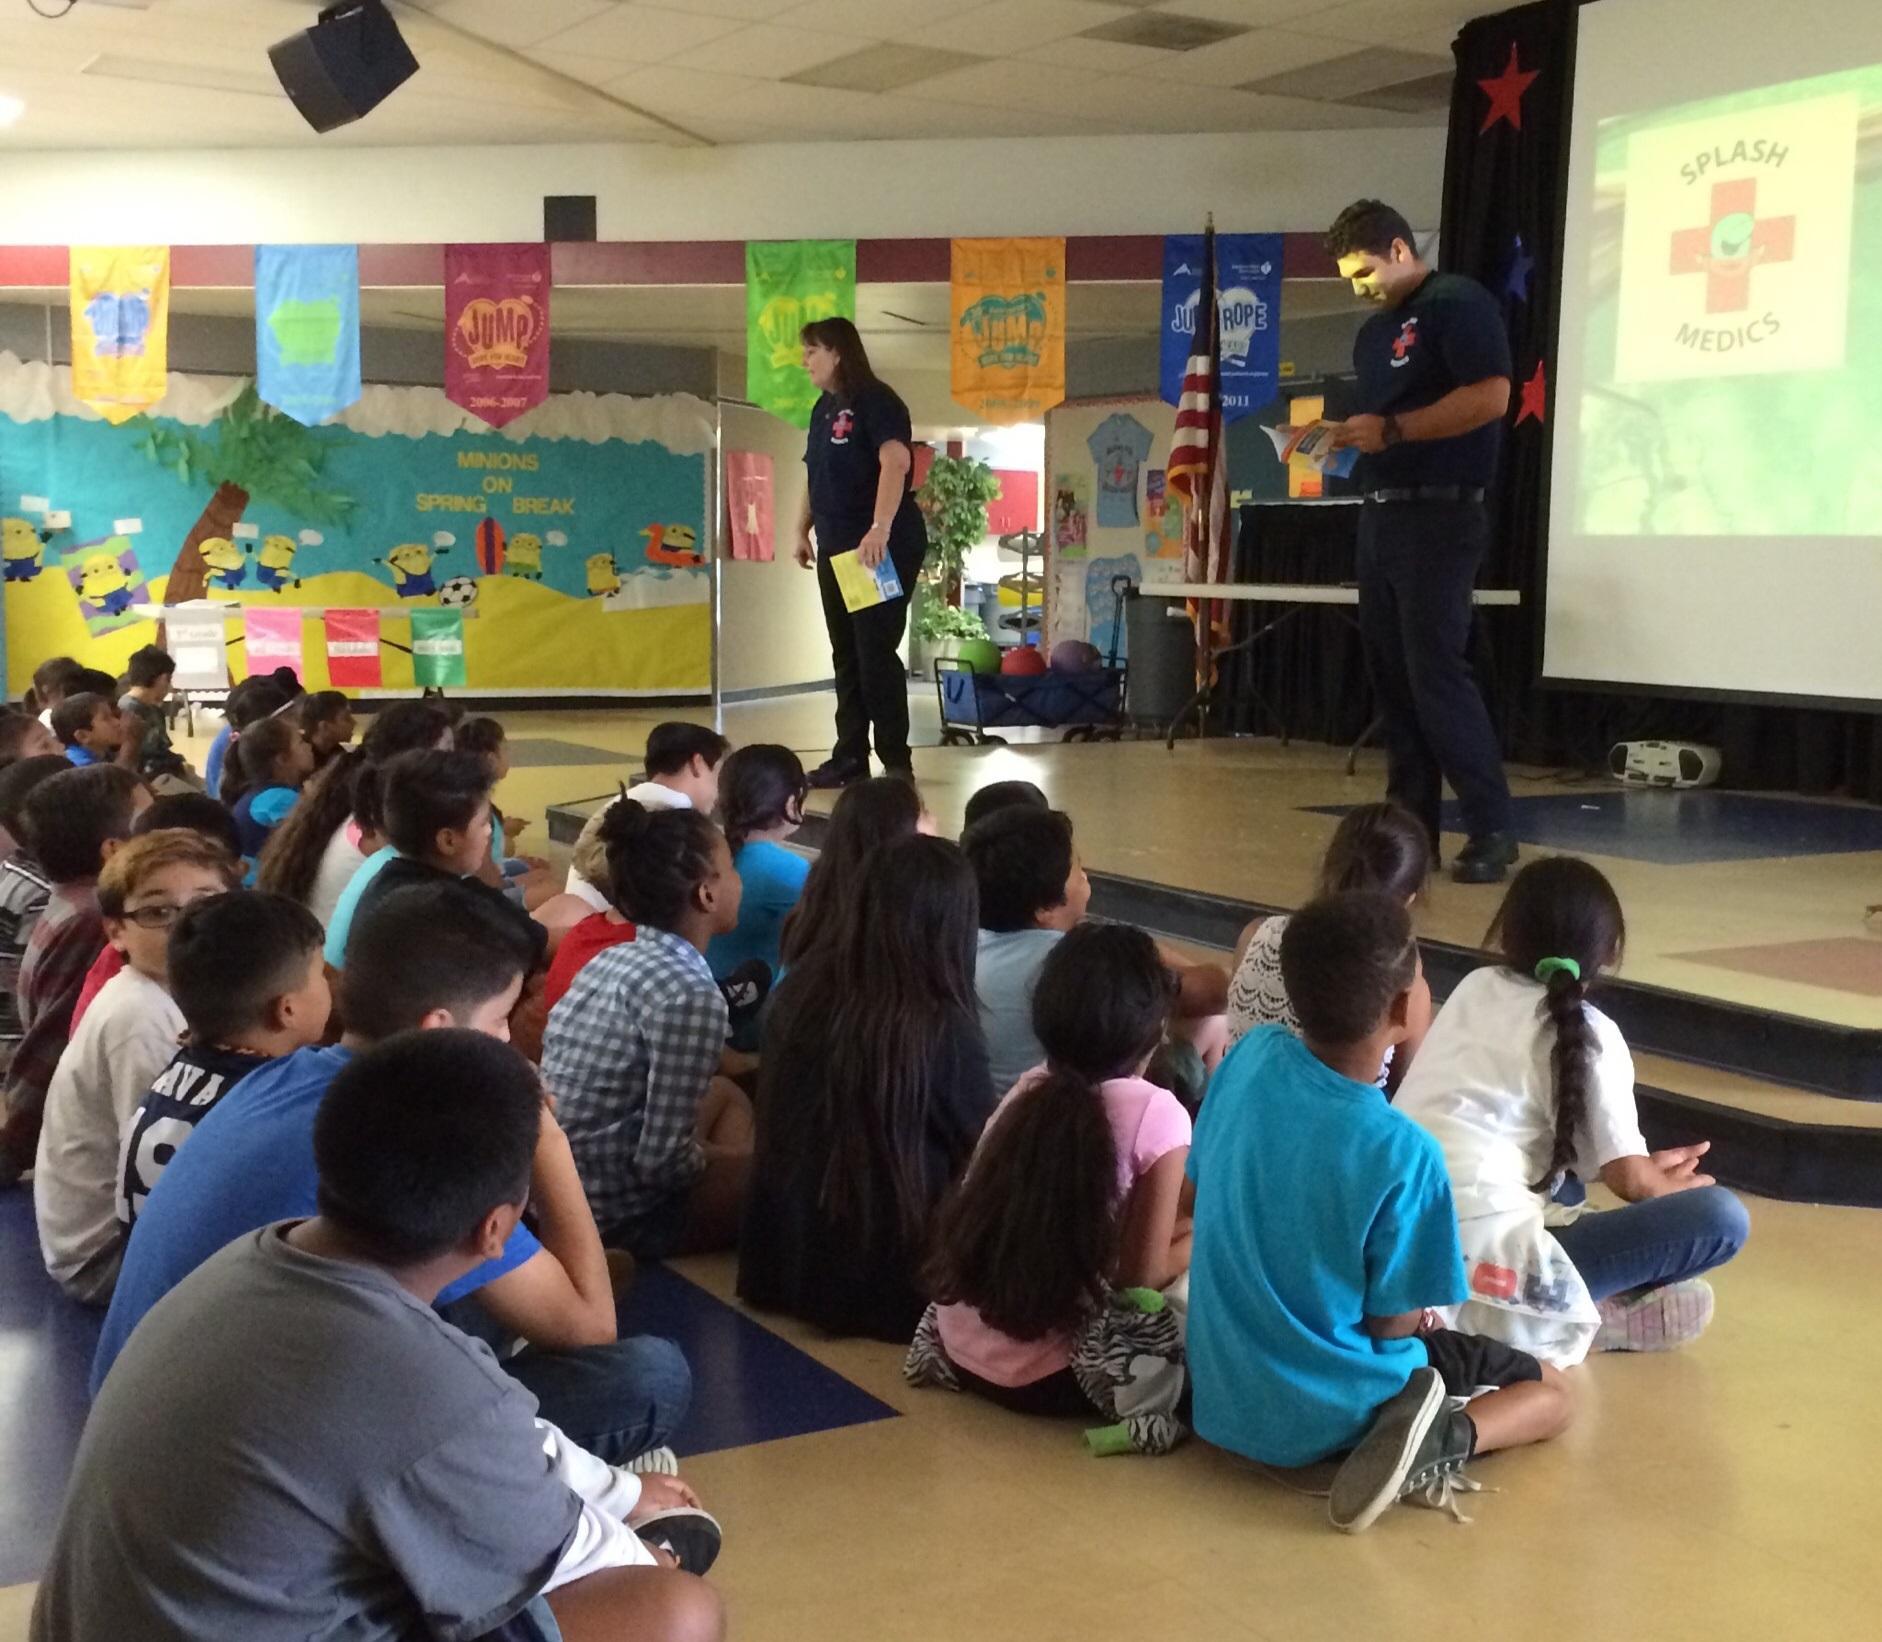 Lisa La Russo and Armando Reyes teach water safety tips to children at John Stallings Elementary in Corona, California.